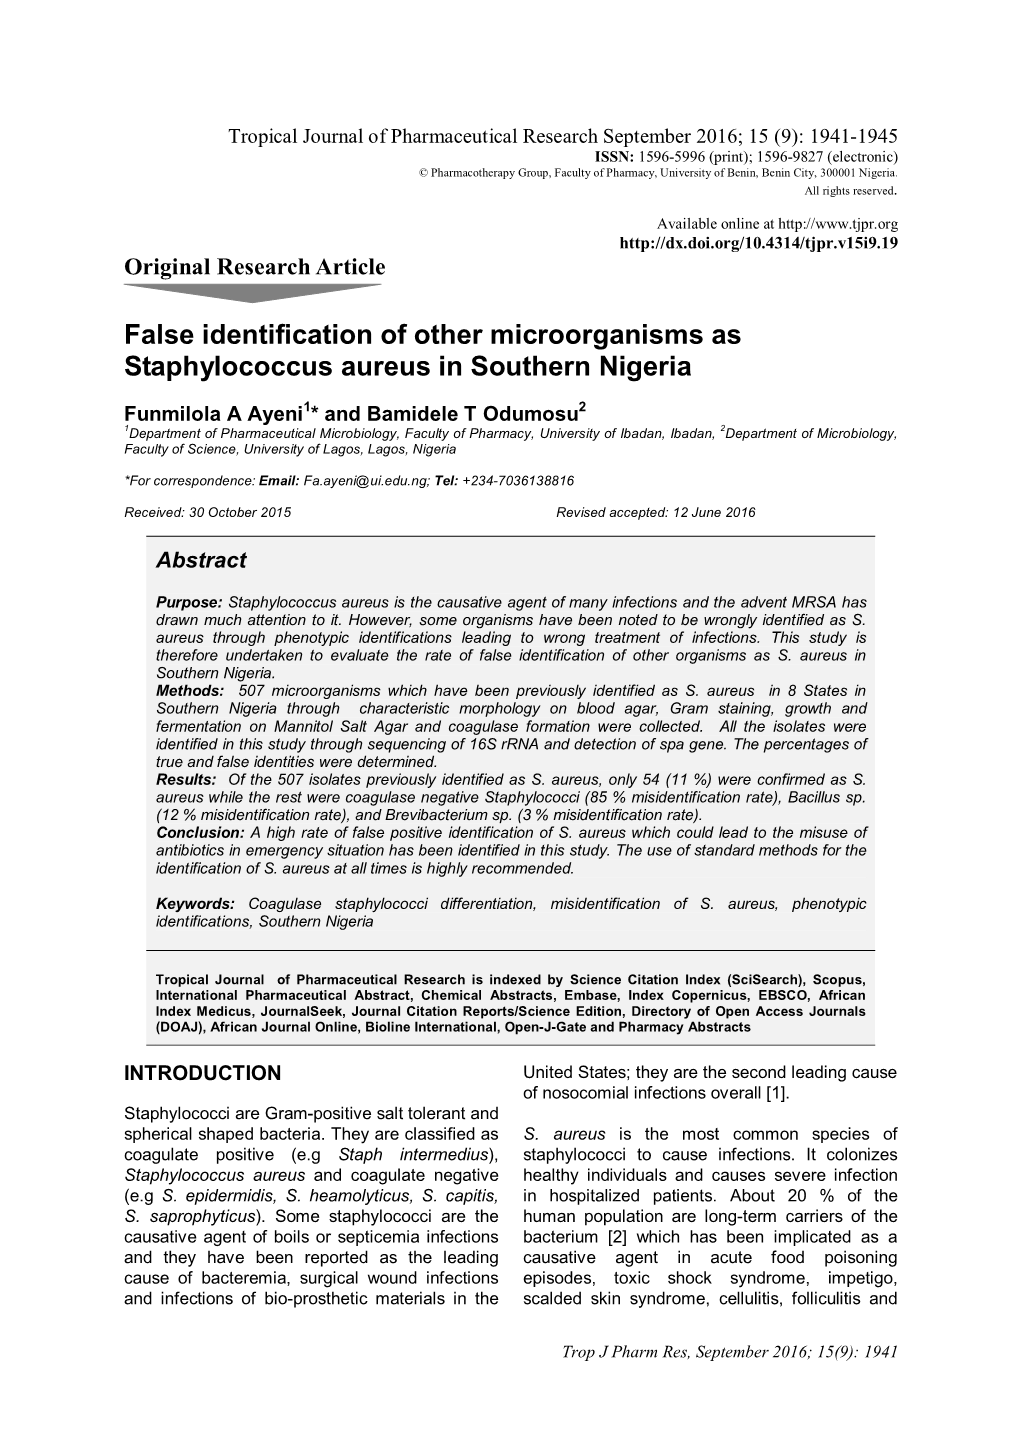 False Identification of Other Microorganisms As Staphylococcus Aureus in Southern Nigeria